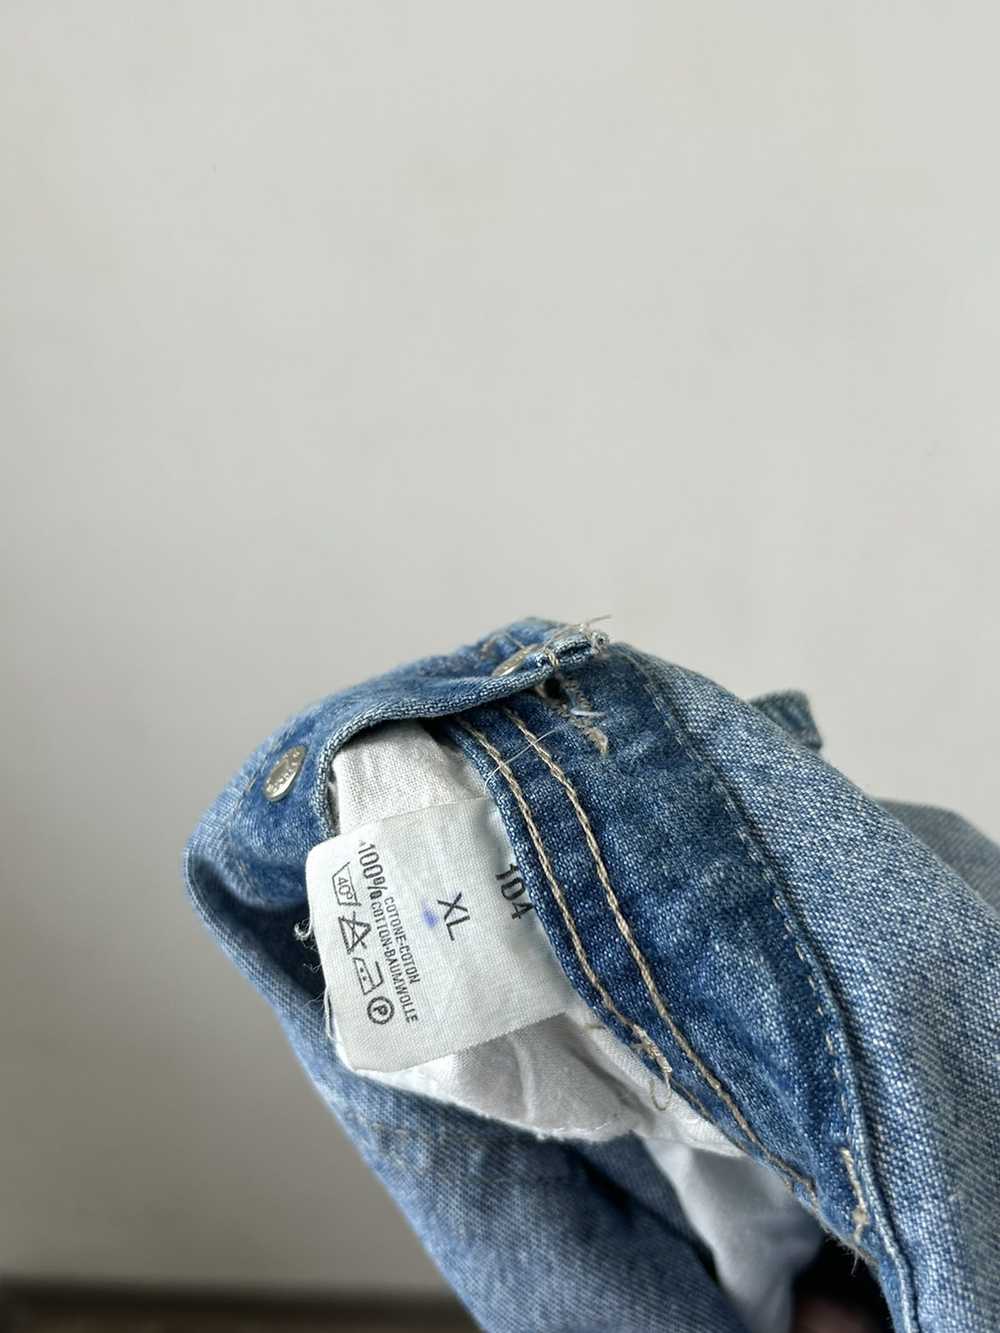 Japanese Brand × Overalls × Workers Cars overall - image 3